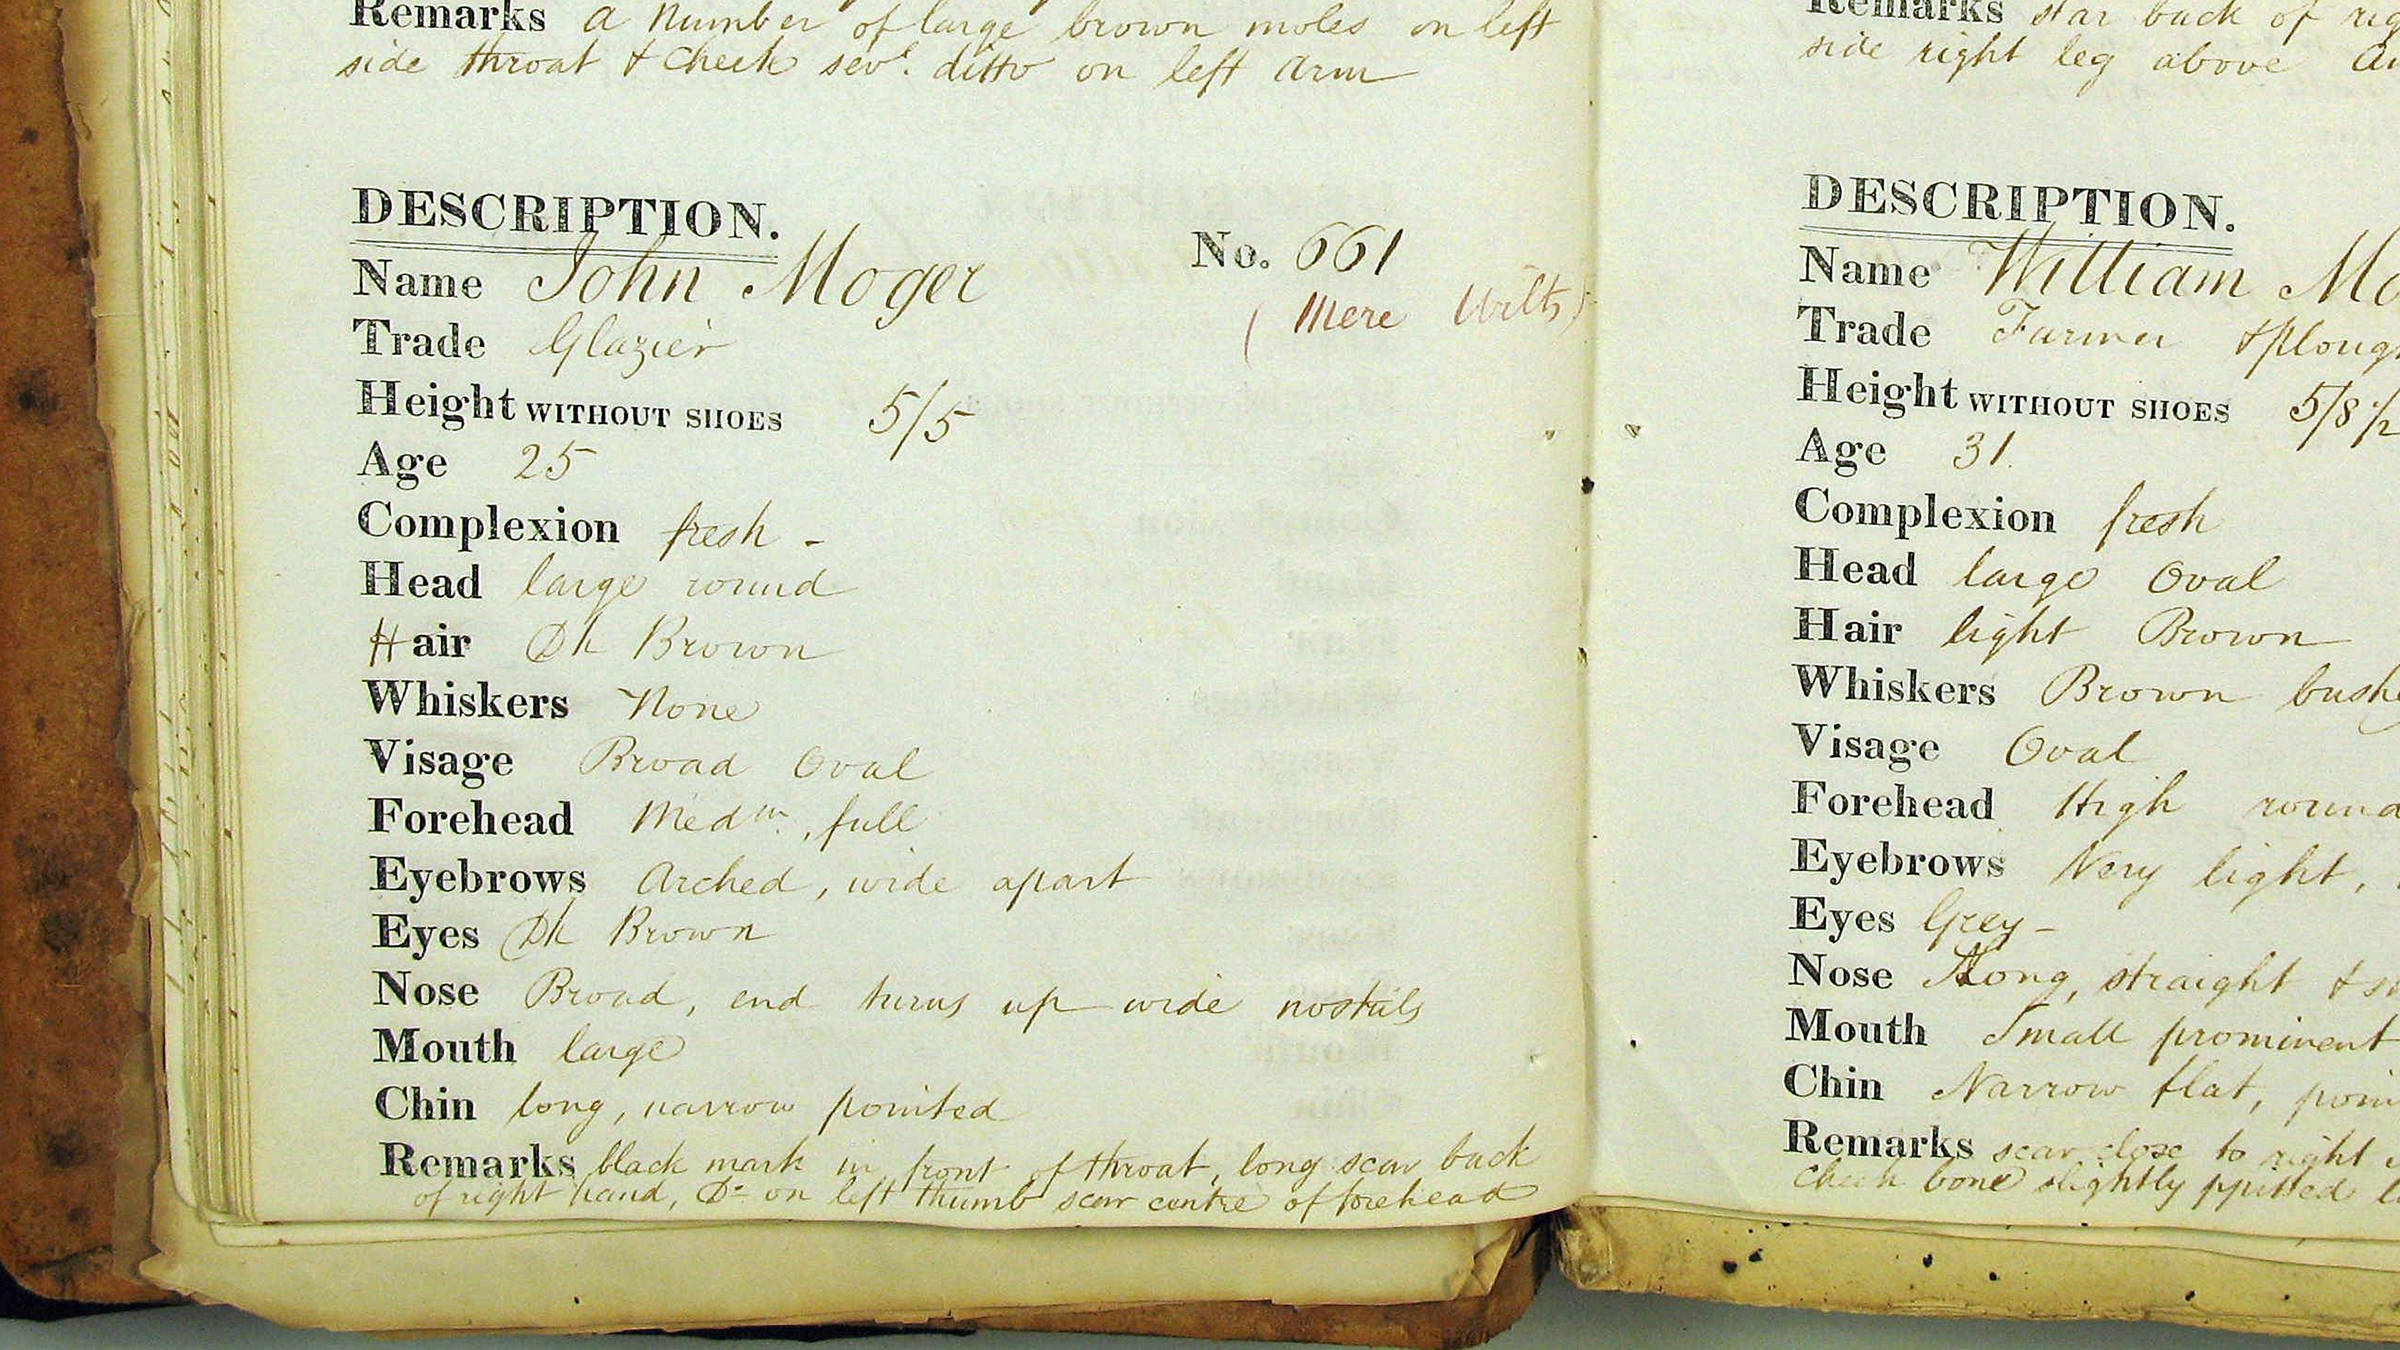 Excerpt from ledgers held as part of Brickendon Estate’s archives mentioning John Moger.